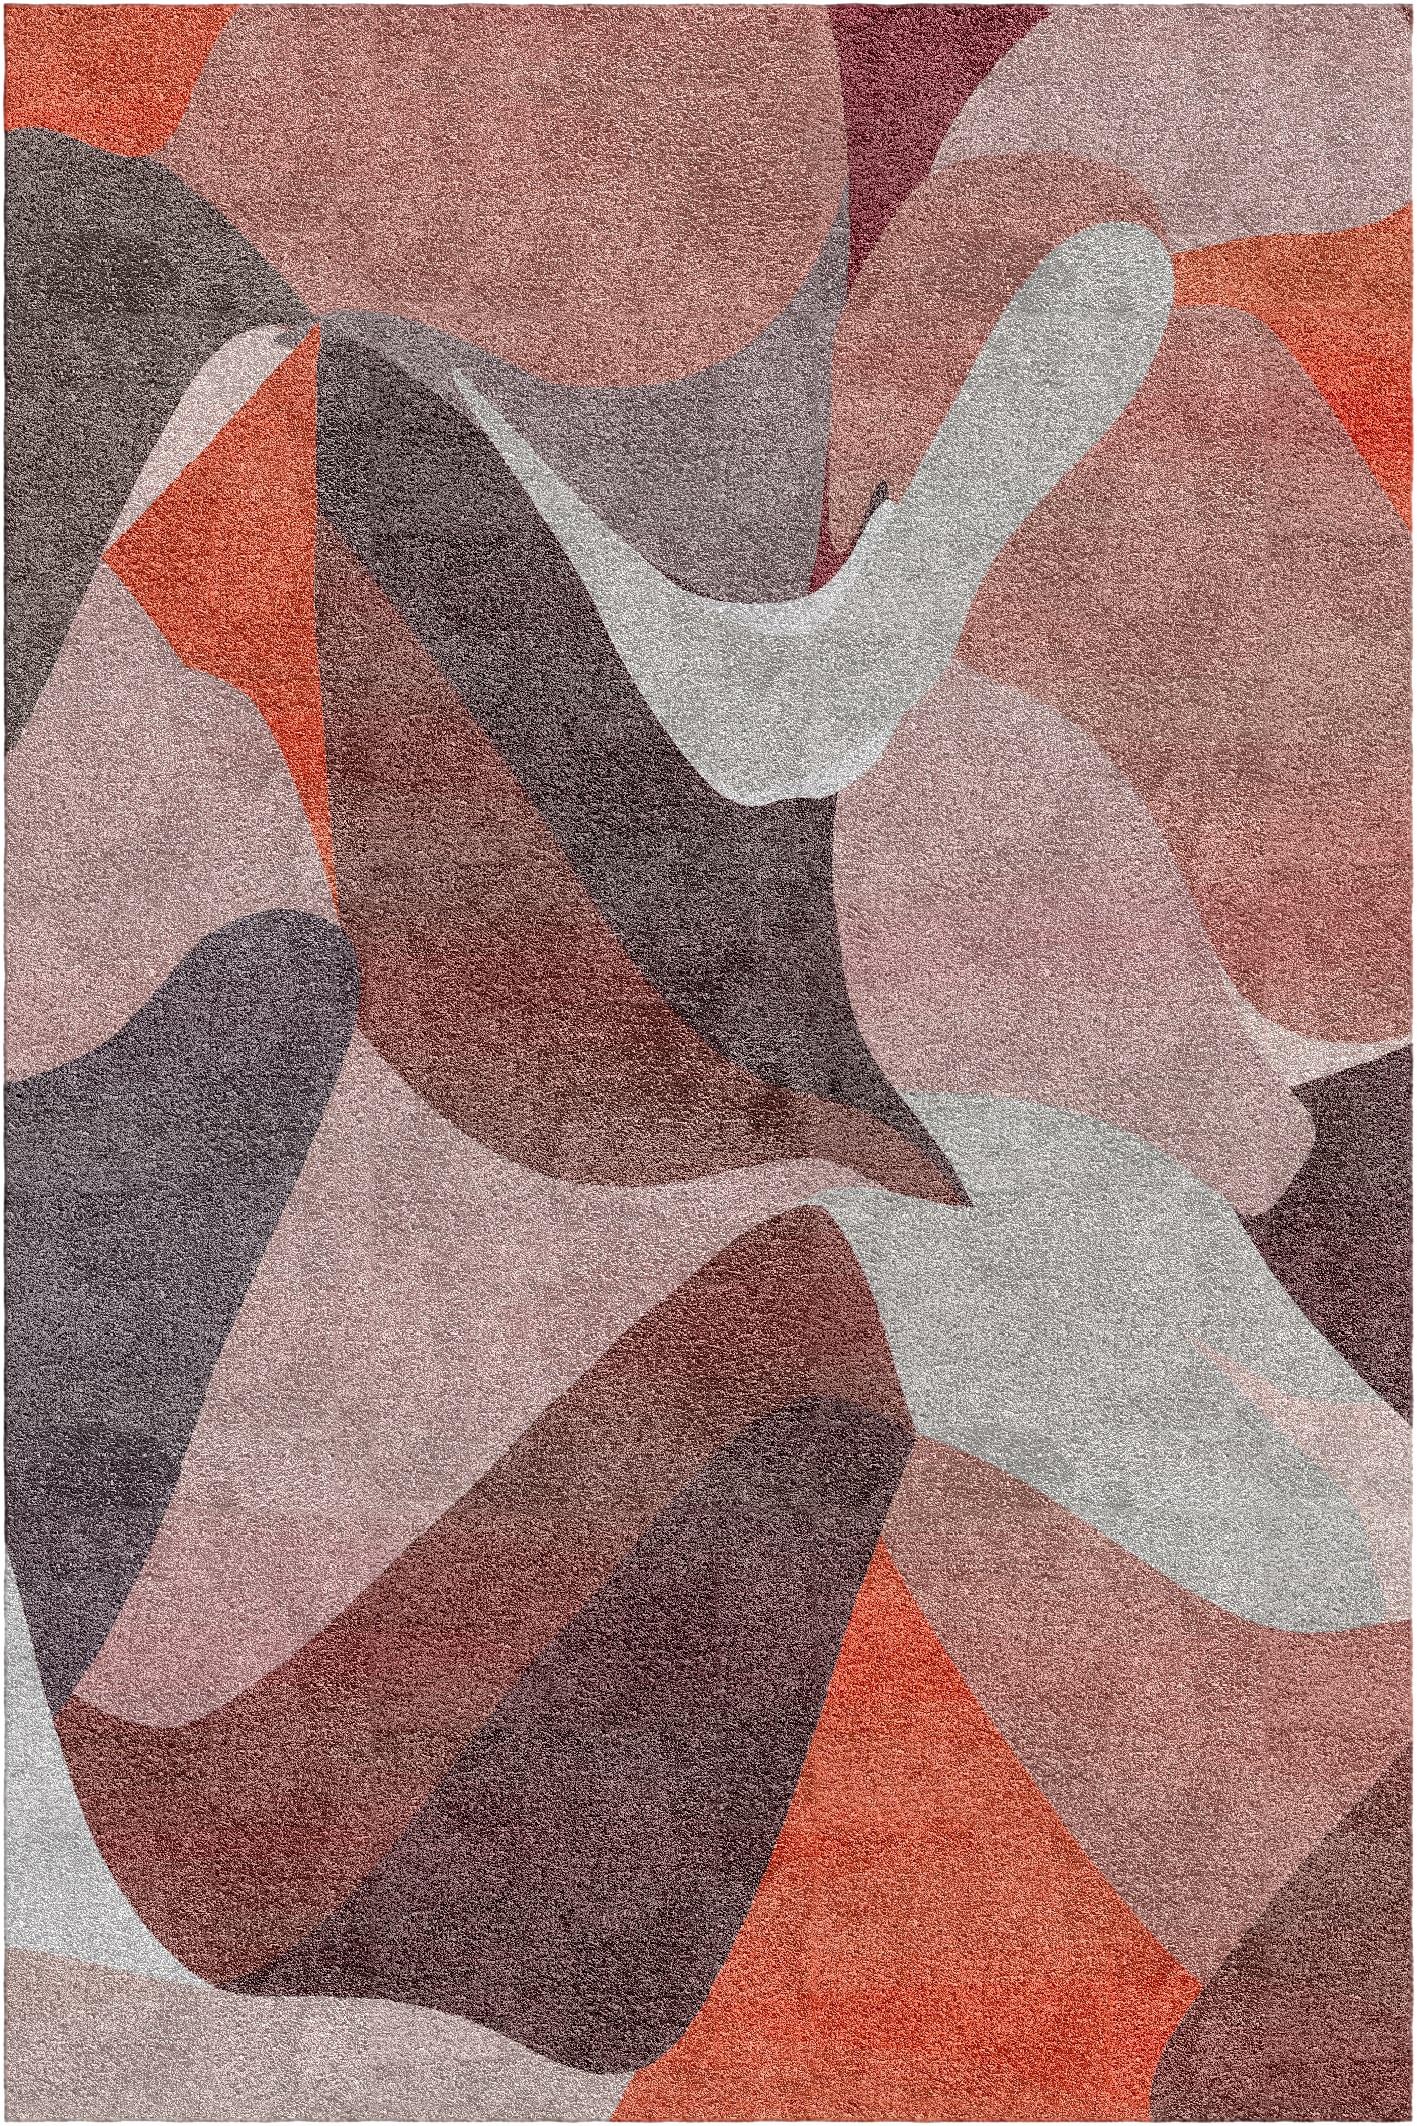 Dune rug II by Vanessa Ordoñez
Dimensions: D 300 x W 200 x H 1.5 cm
Materials: bamboo fibers and linen

A stunning collaboration of Vanessa Ordonez with Malcusa, this rug is part of a series inspired by the designer’s intimate connection with